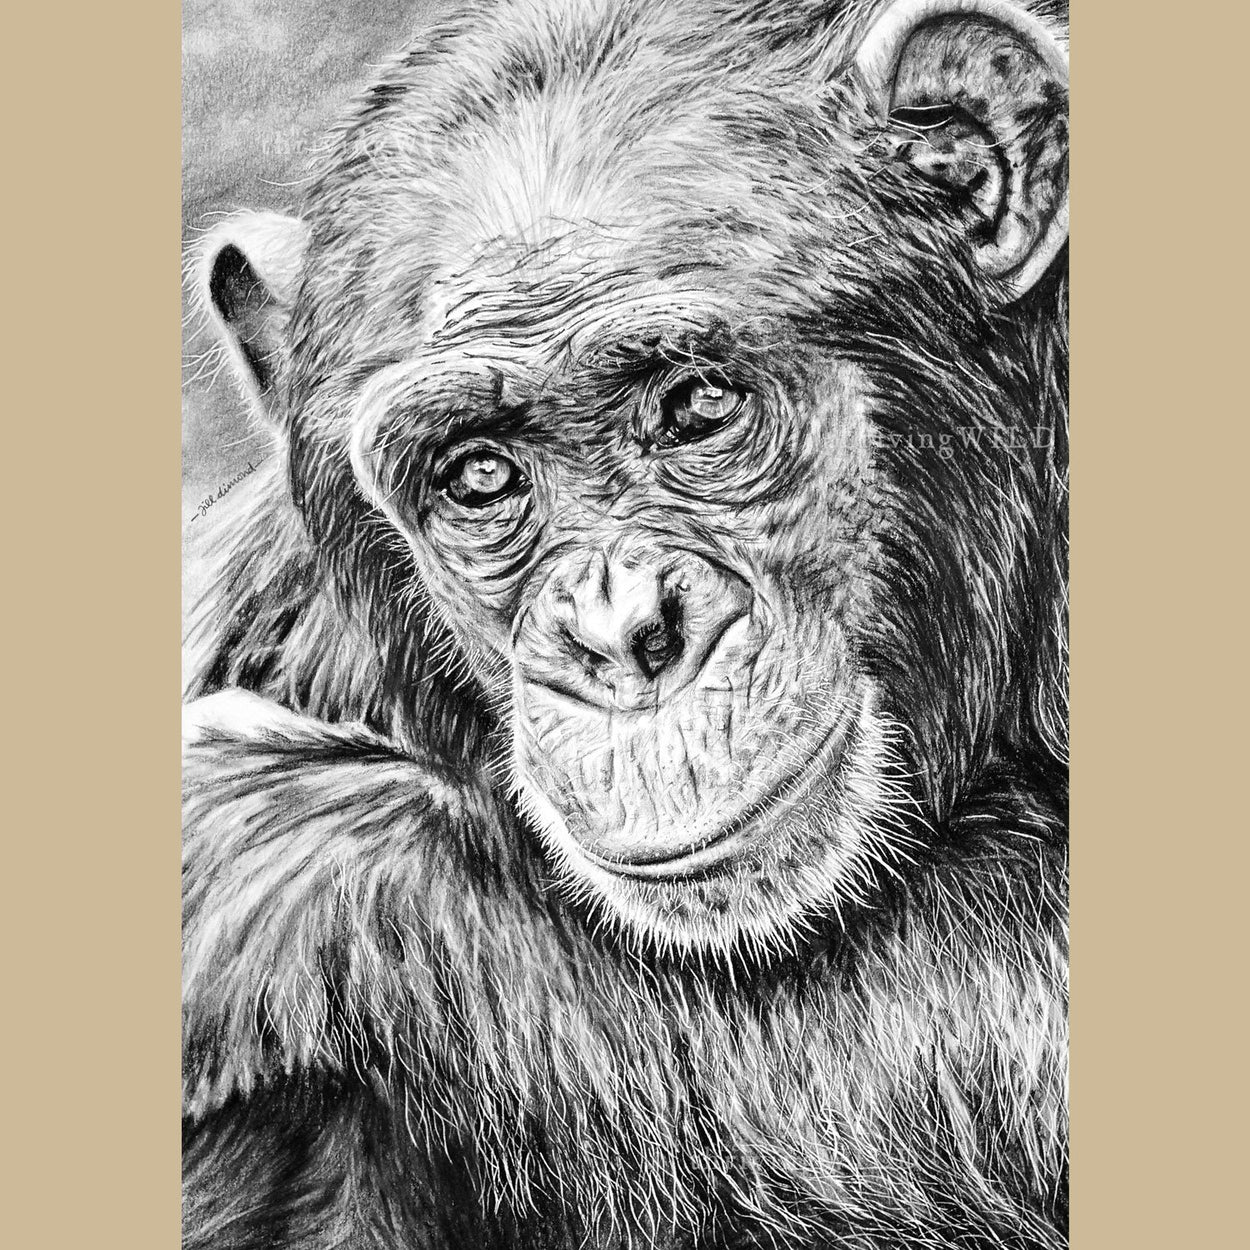 Chimp Wildlife Pencil Drawing - The Thriving Wild